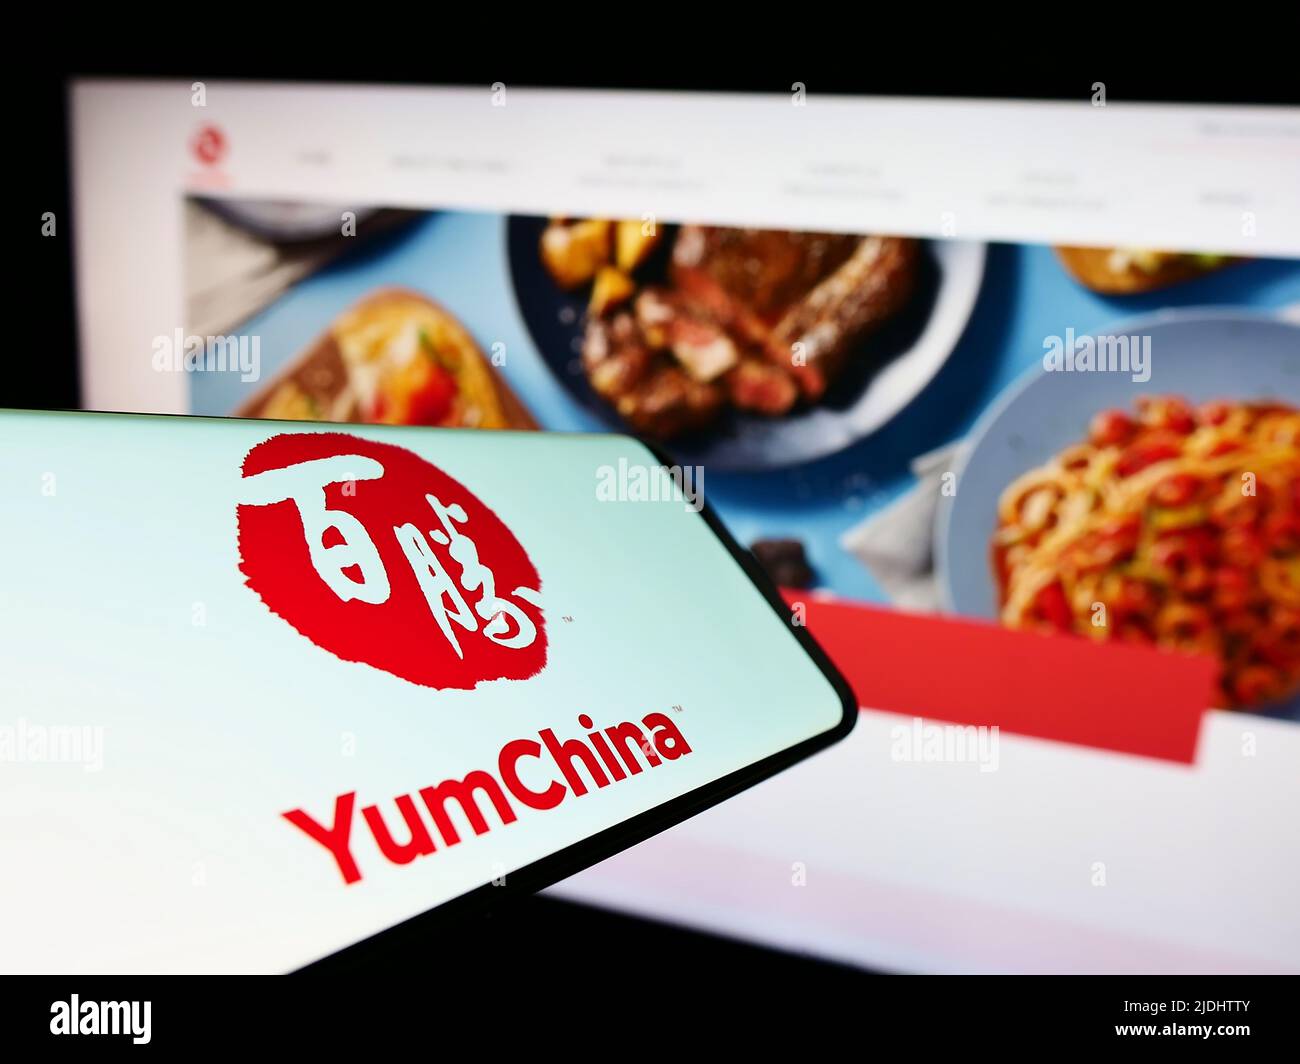 Smartphone with logo of restaurant company Yum China Holdings Inc. on screen in front of business website. Focus on center-right of phone display. Stock Photo